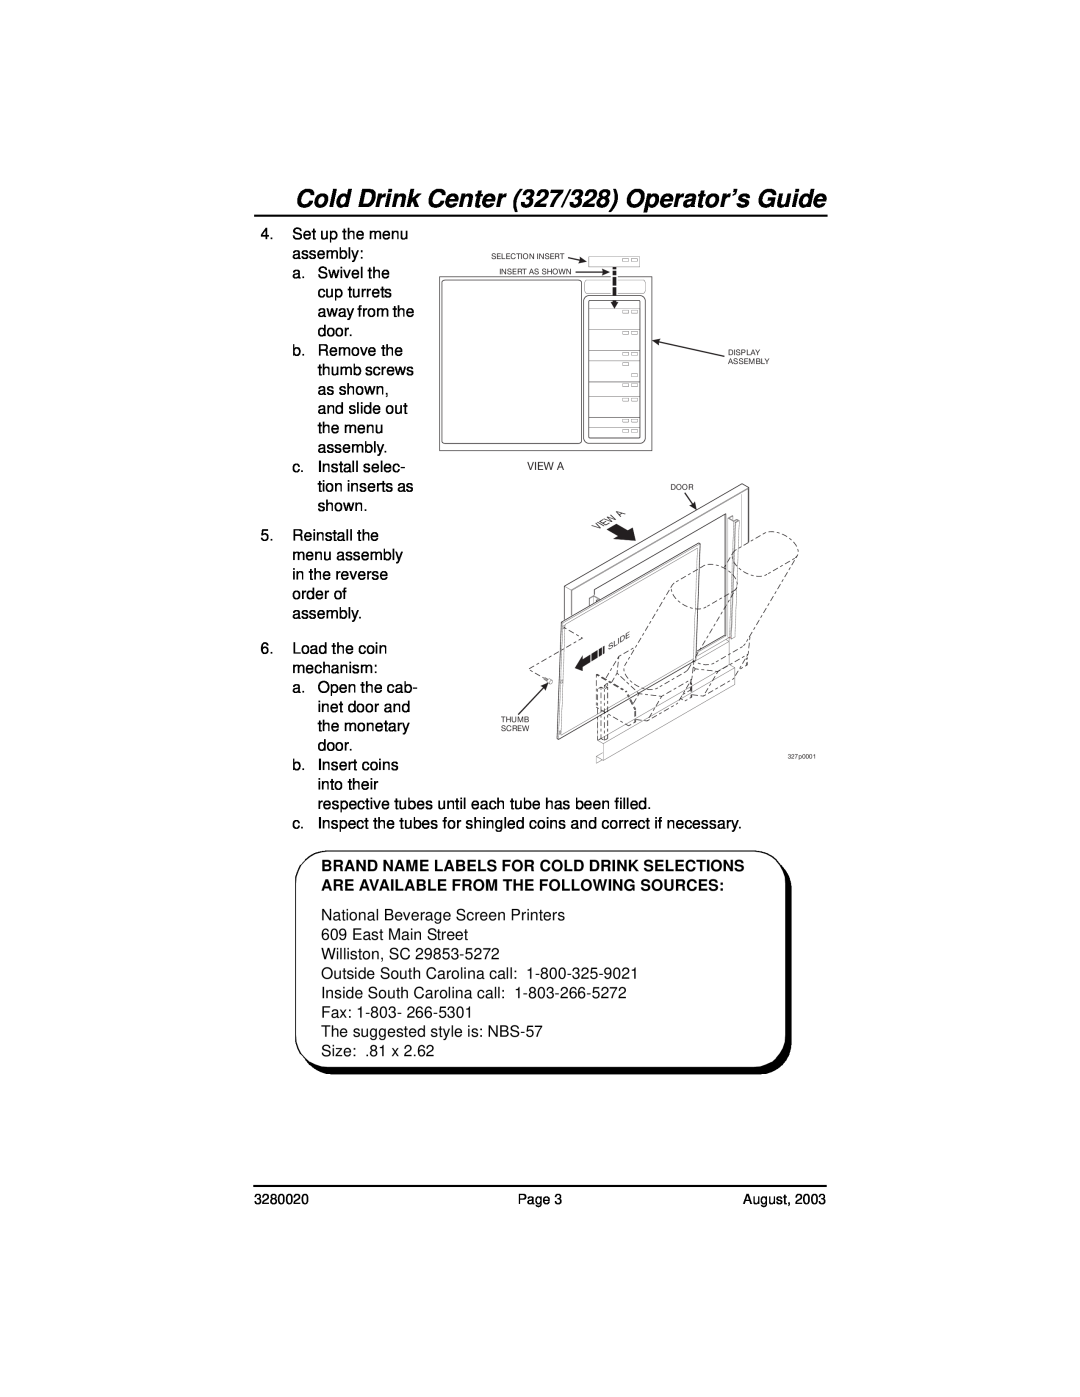 Everpure 325 manual Cold Drink Center 327/328 Operator’s Guide, Set up the menu assembly 